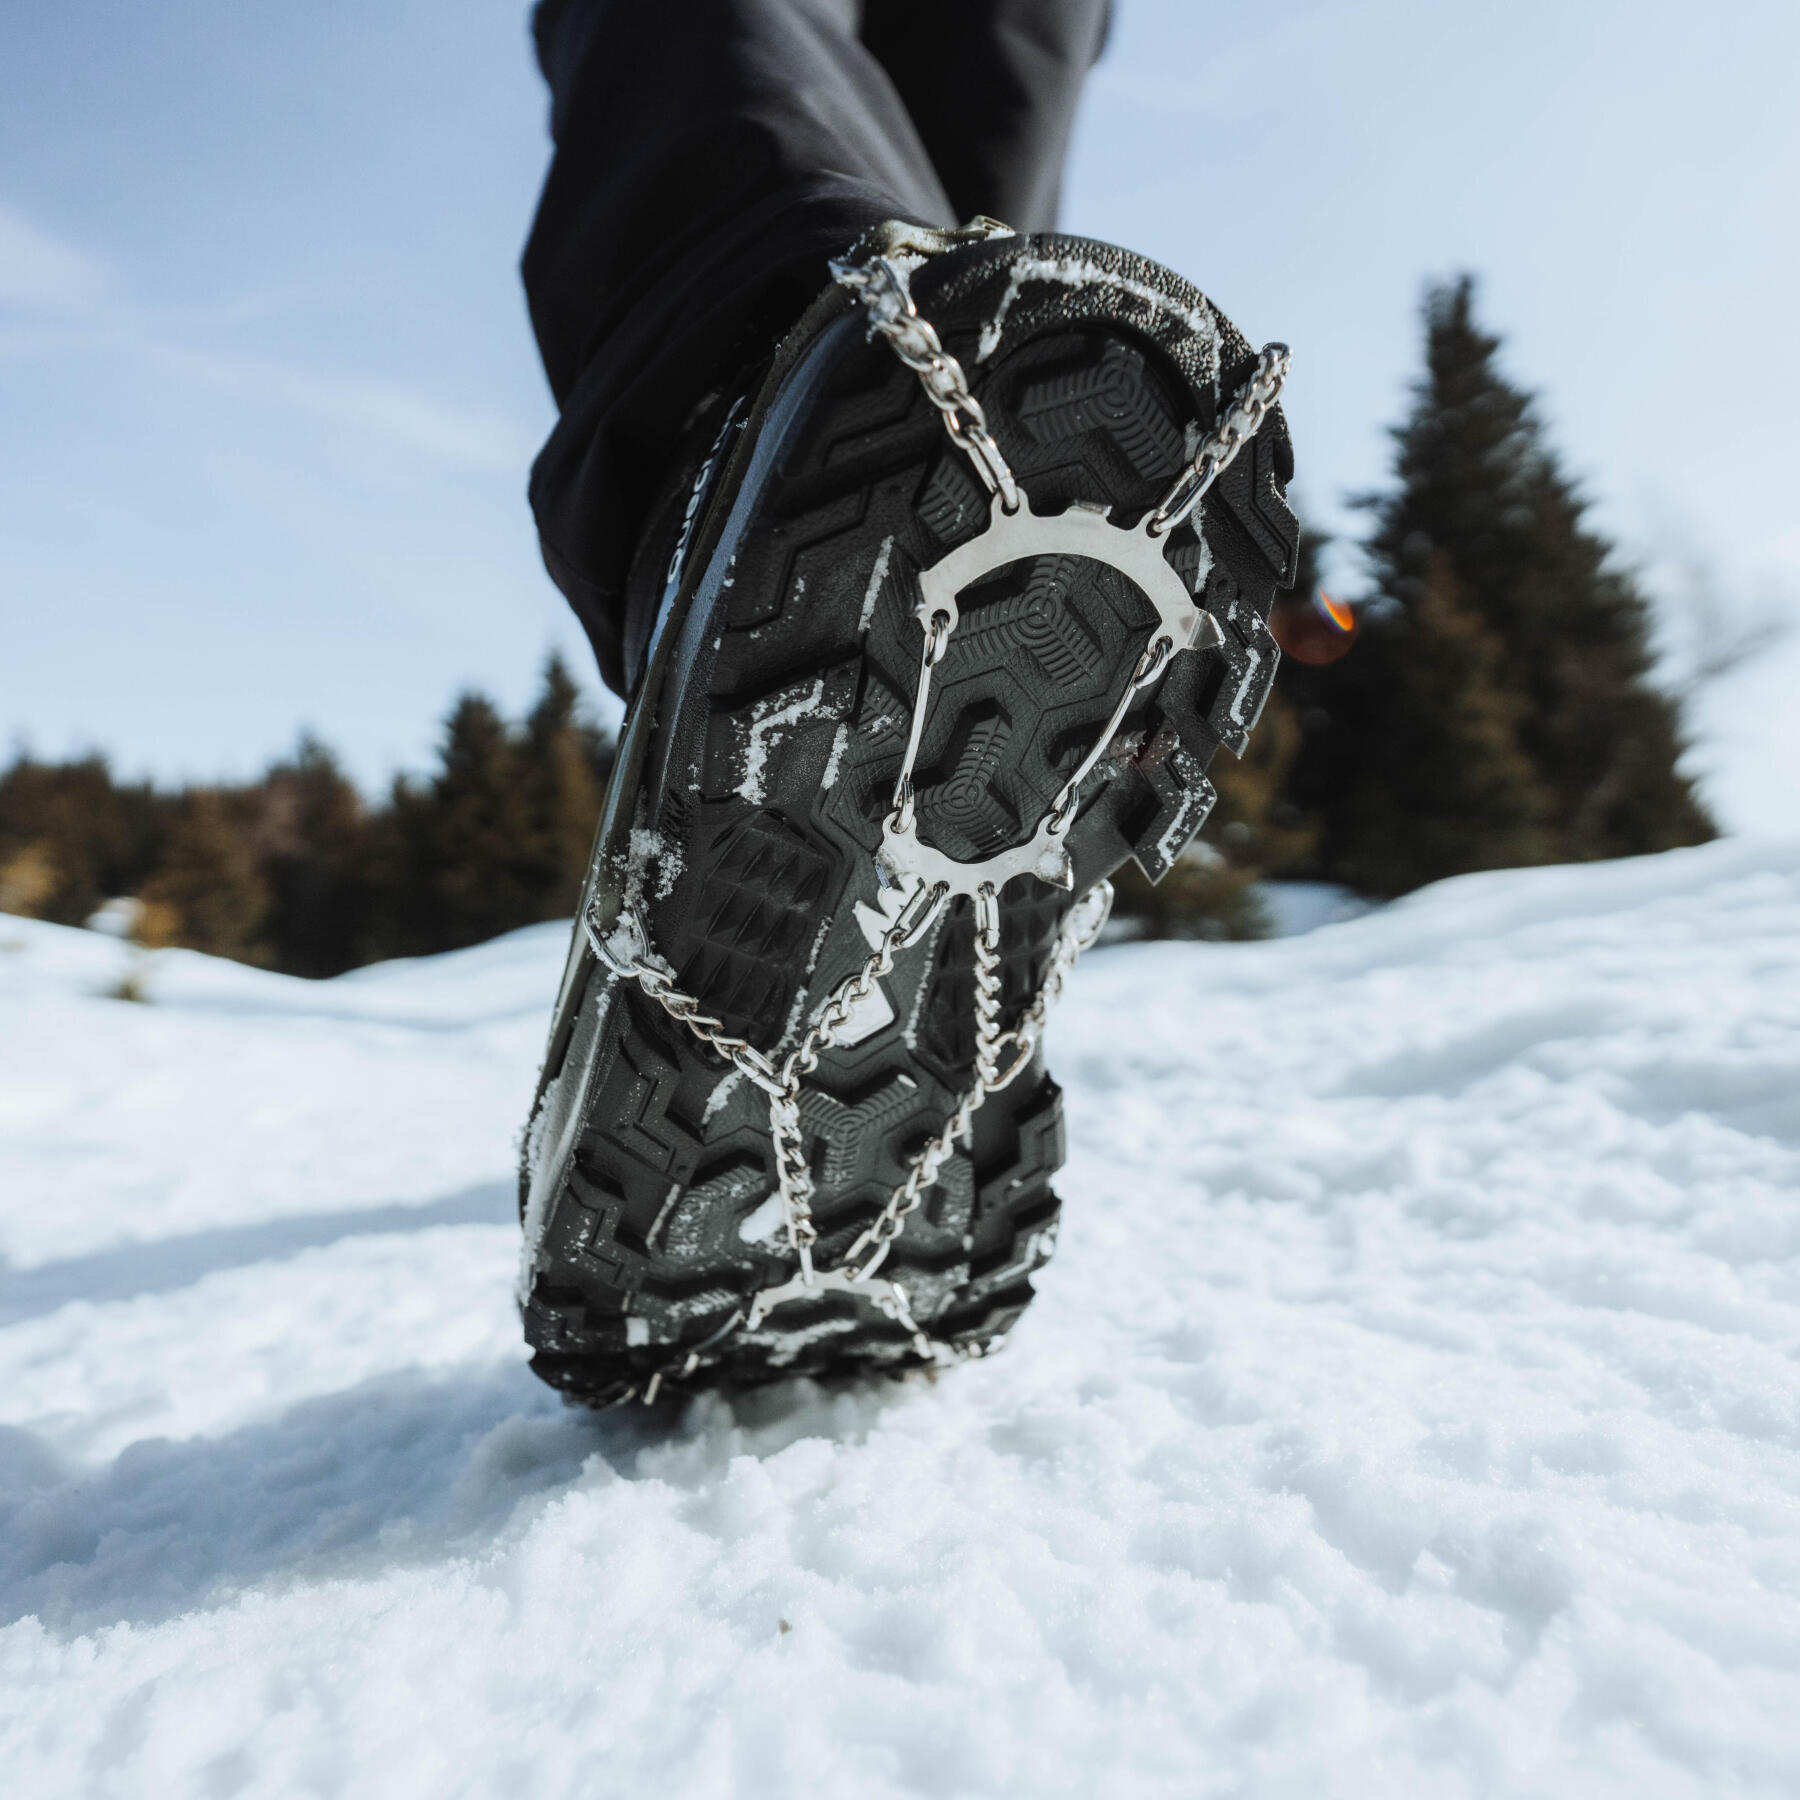 Choosing your snow hiking outfit using the Quechua advice by Decathlon